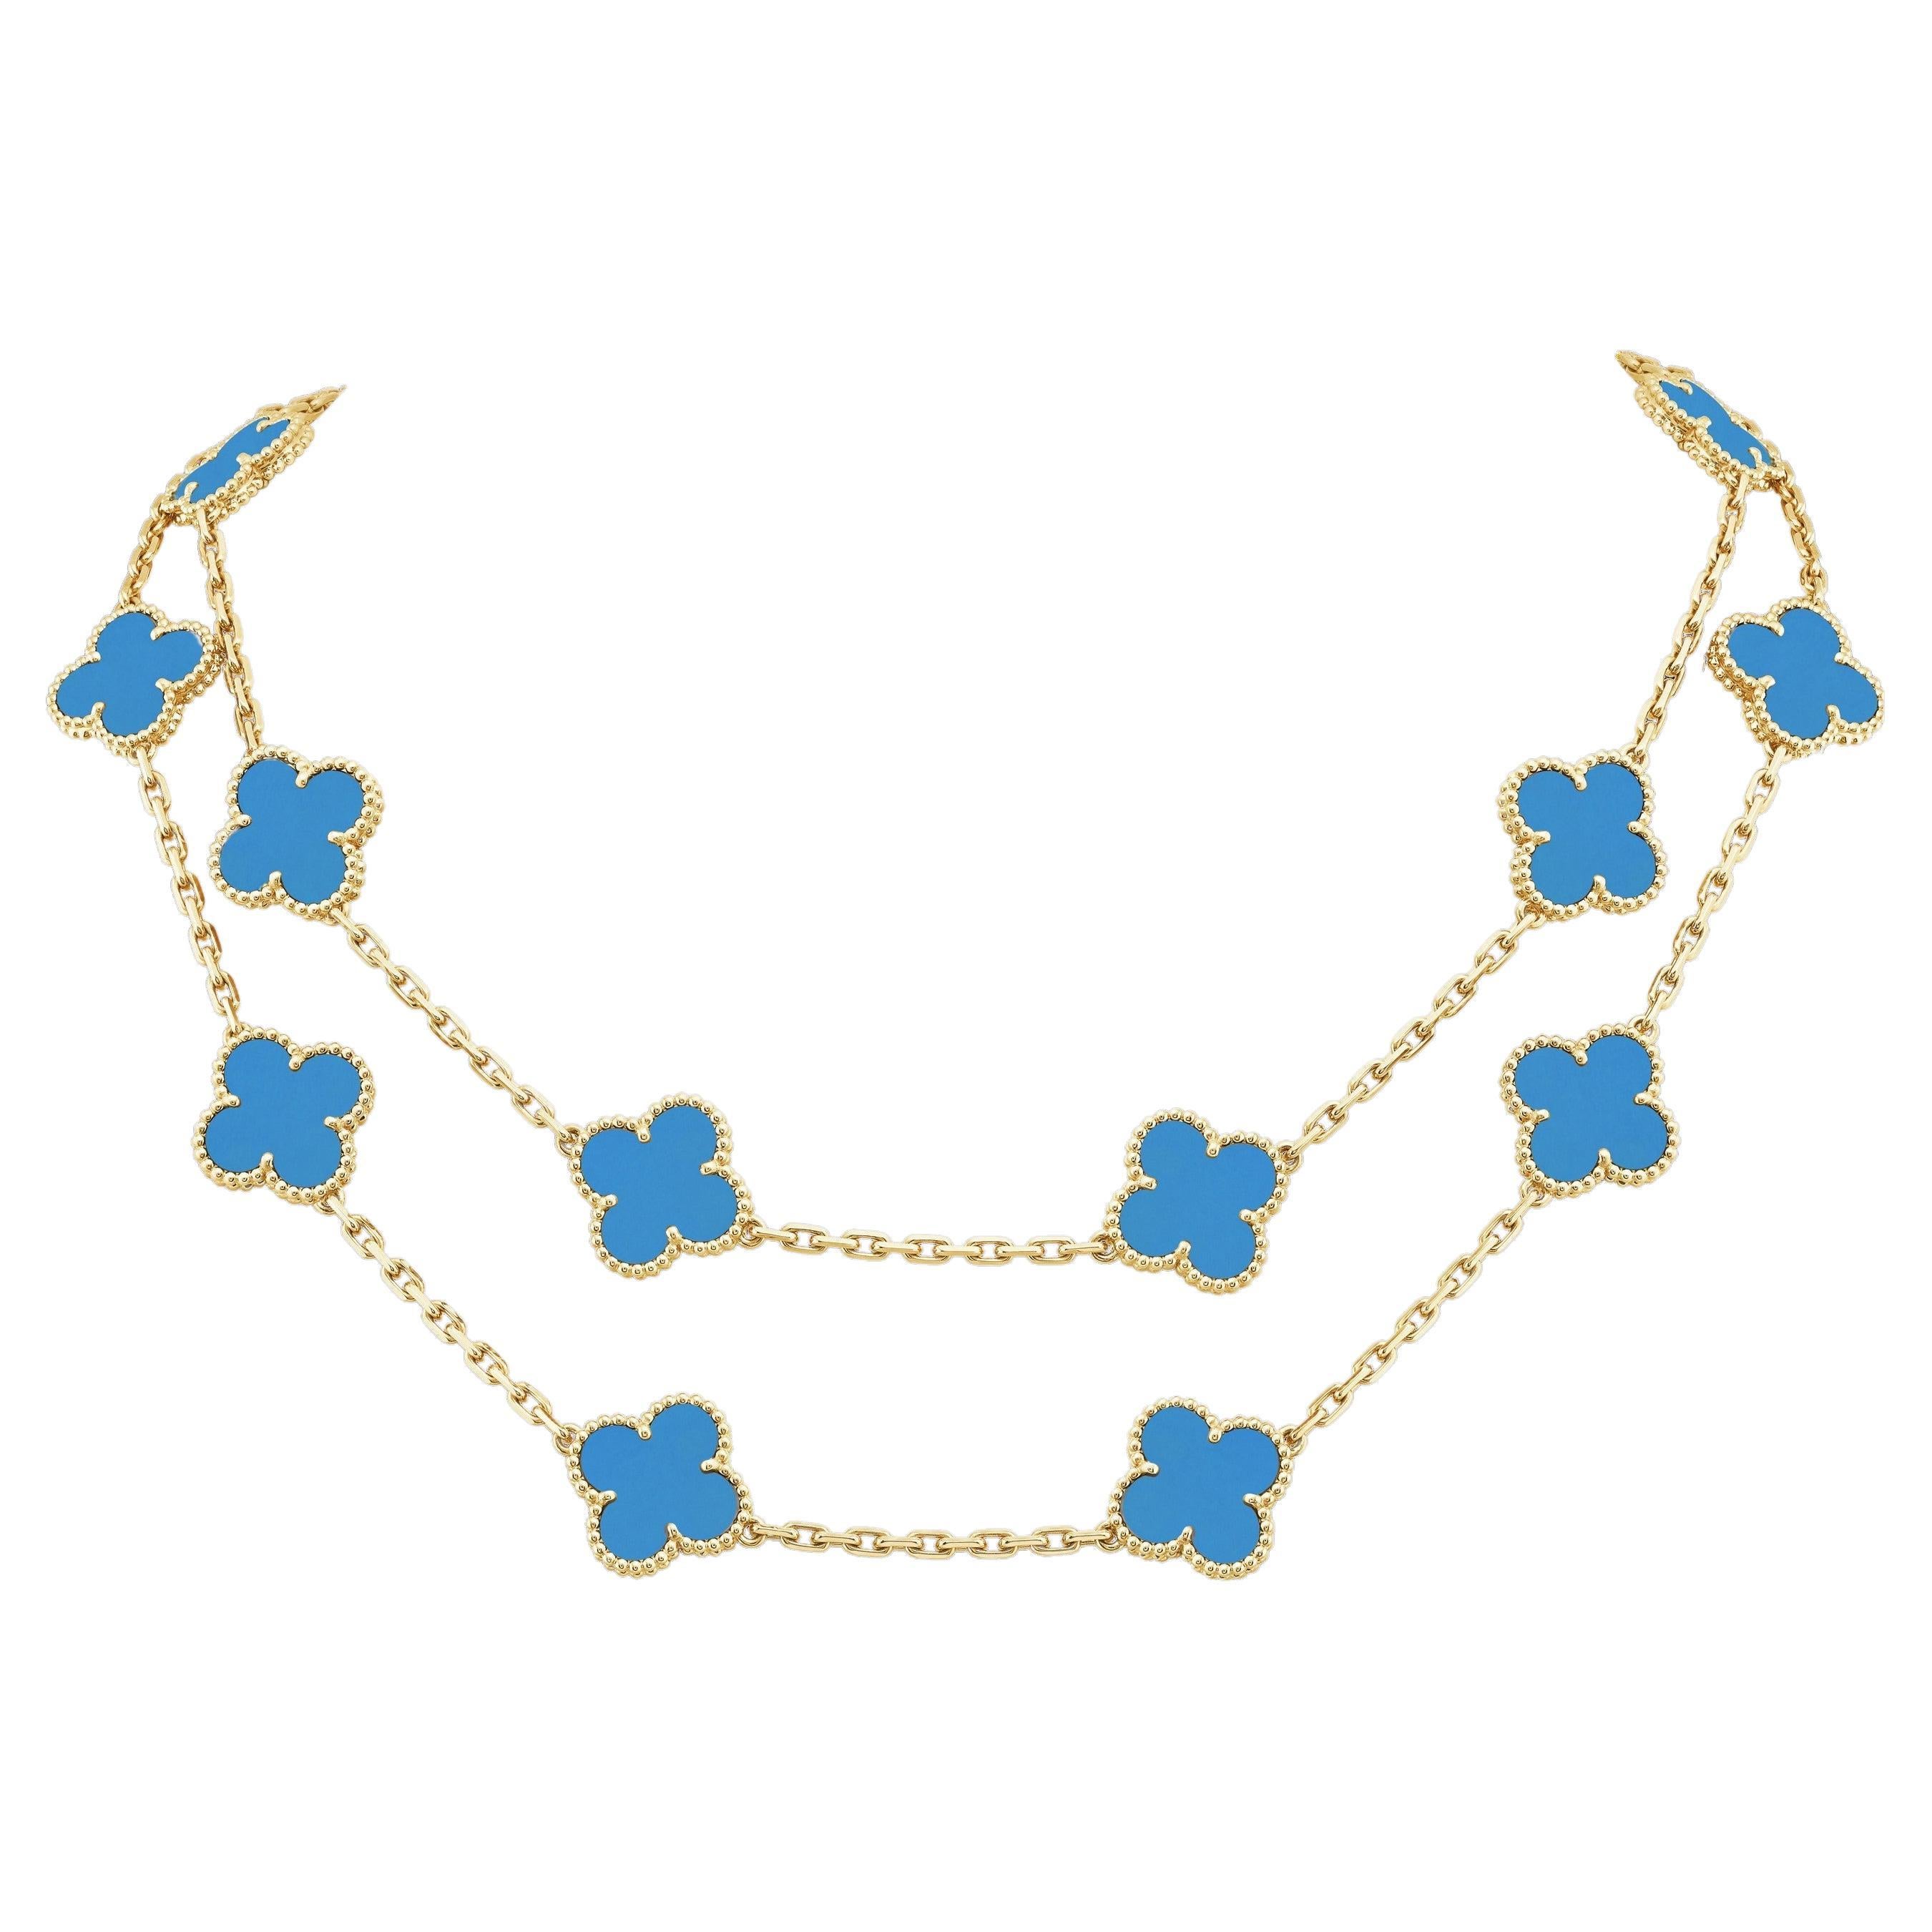 This Turquoise Van Cleef & Arpels Alhambra Necklace Is a Rare and Alluring  Find | The Study